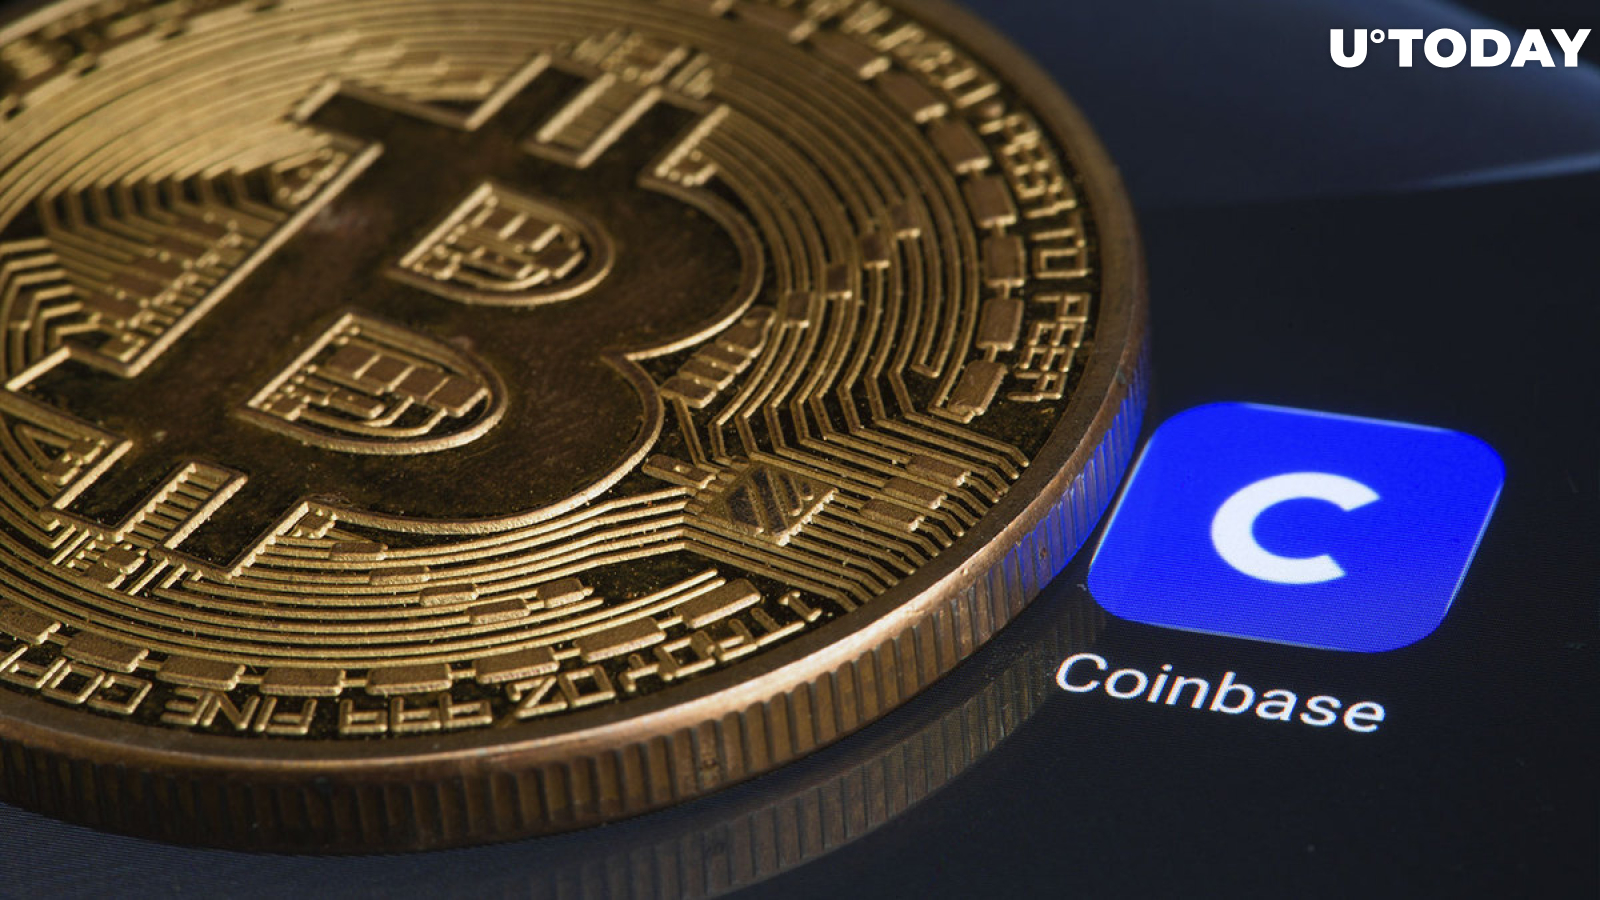 Massive Bitcoin Chunks Sent to Coinbase, Community Expects BTC Sell-Off